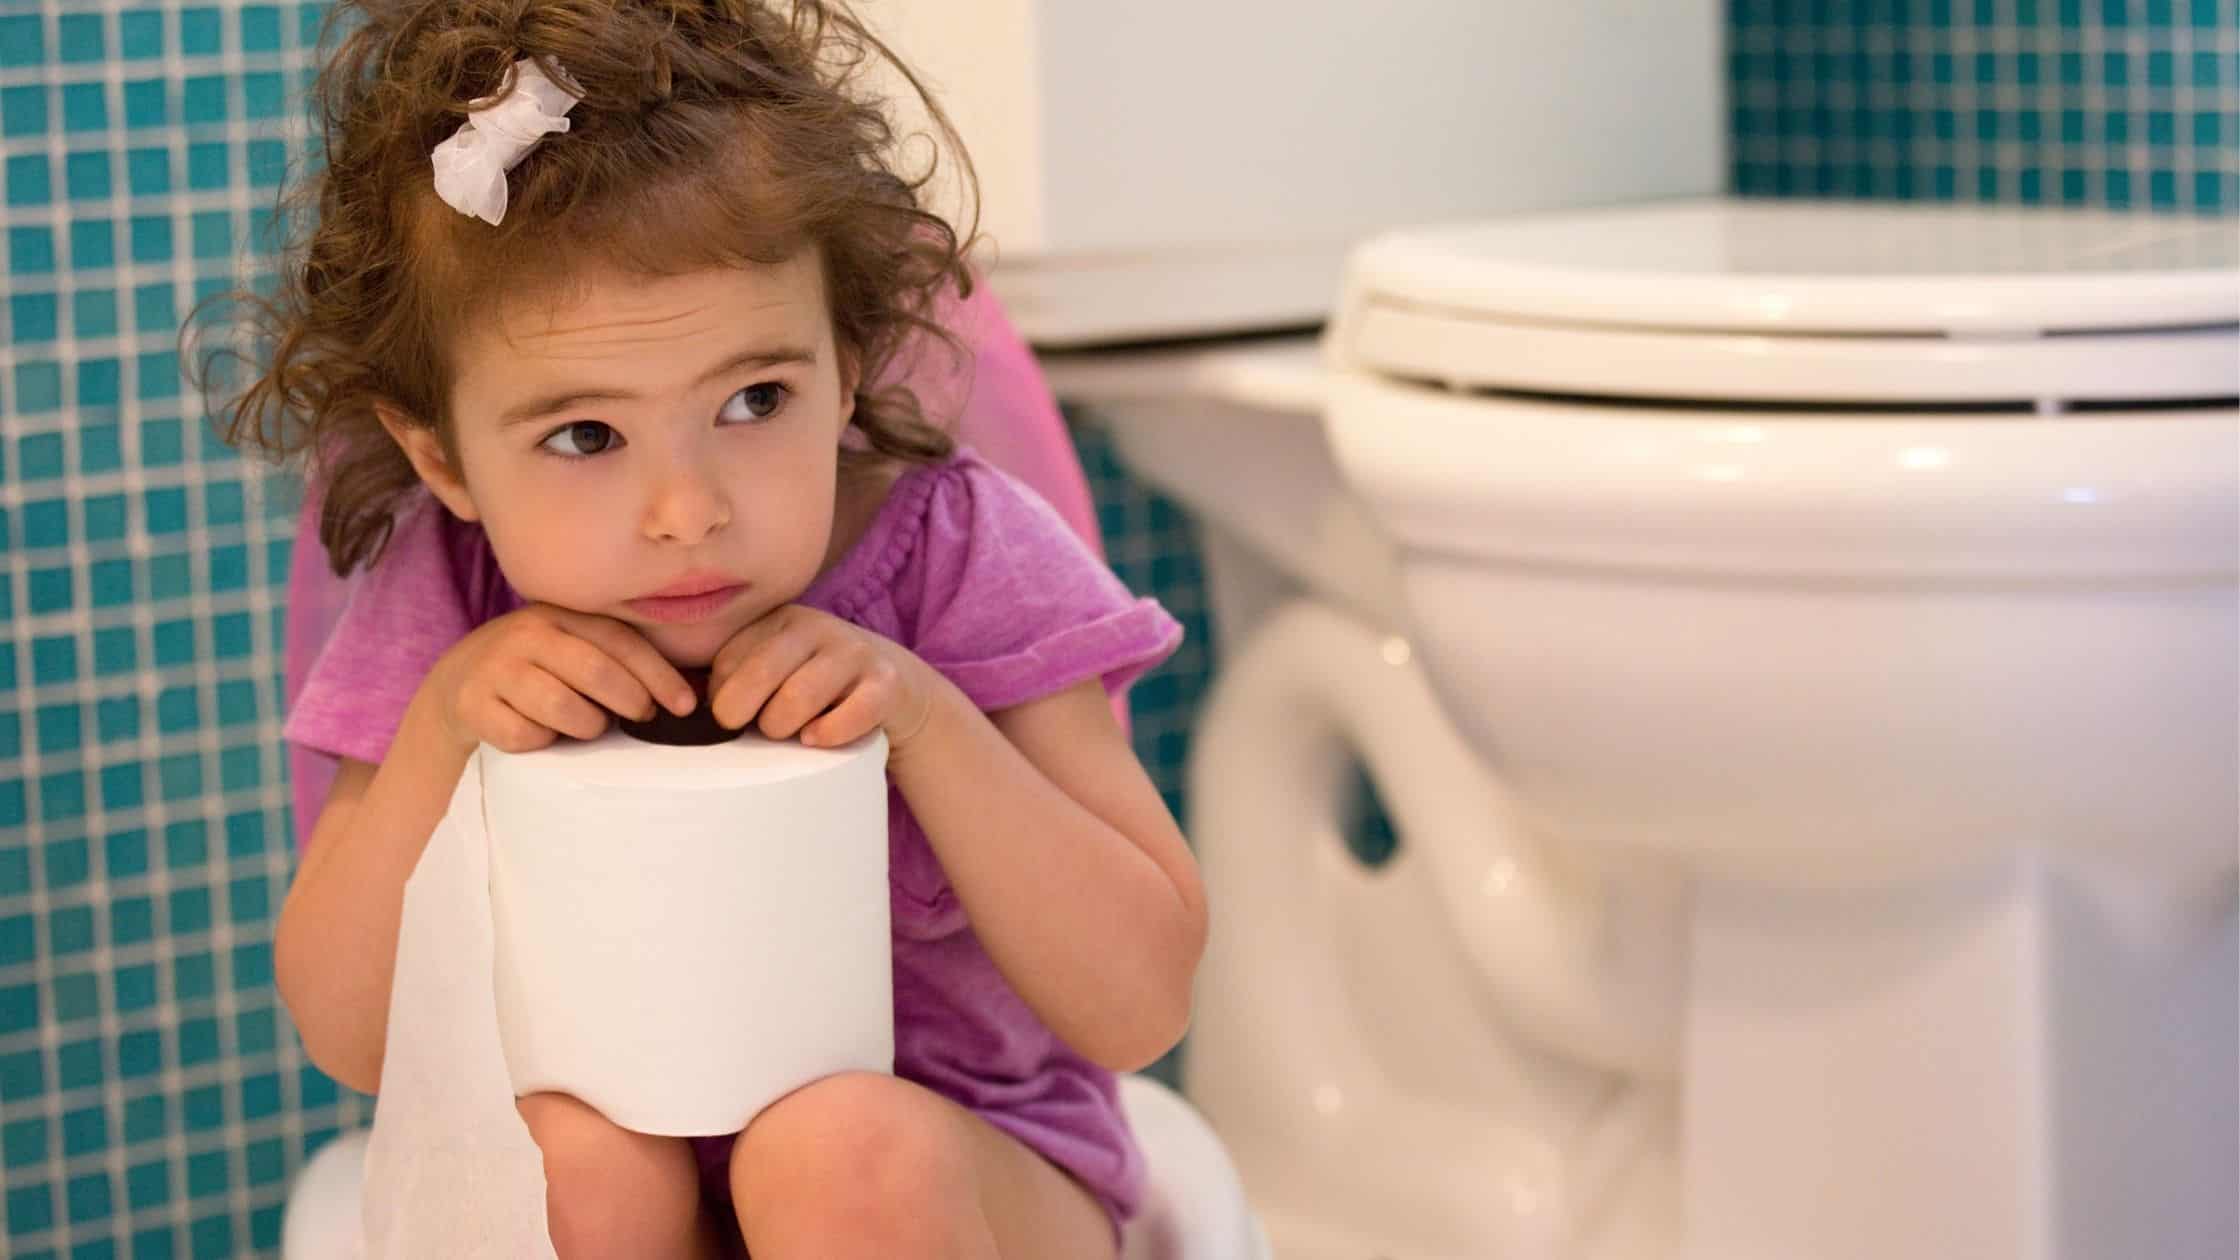 Little girl sitting in the bathroom holding a roll of toilet paper.